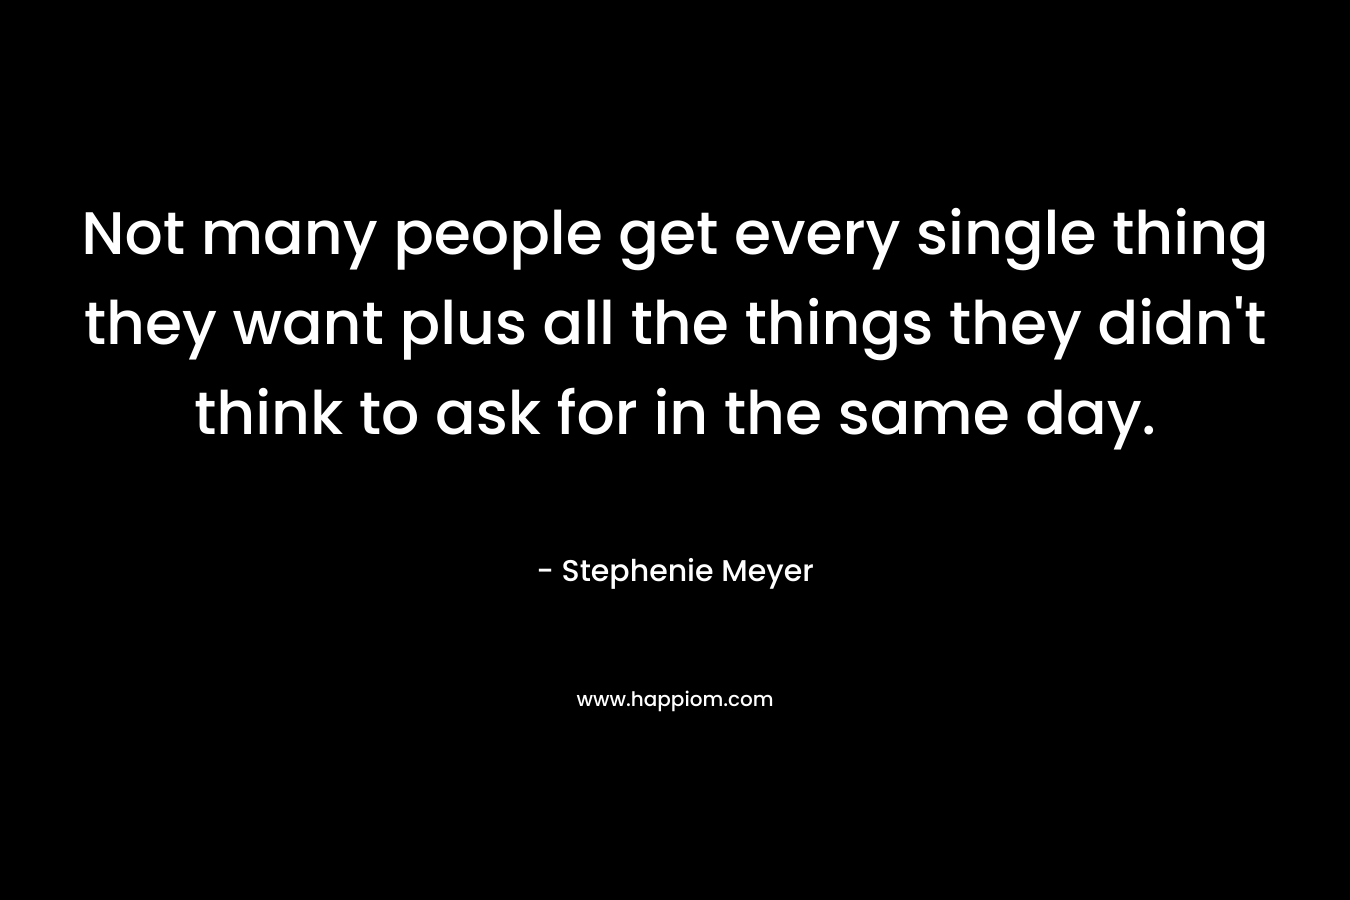 Not many people get every single thing they want plus all the things they didn't think to ask for in the same day.